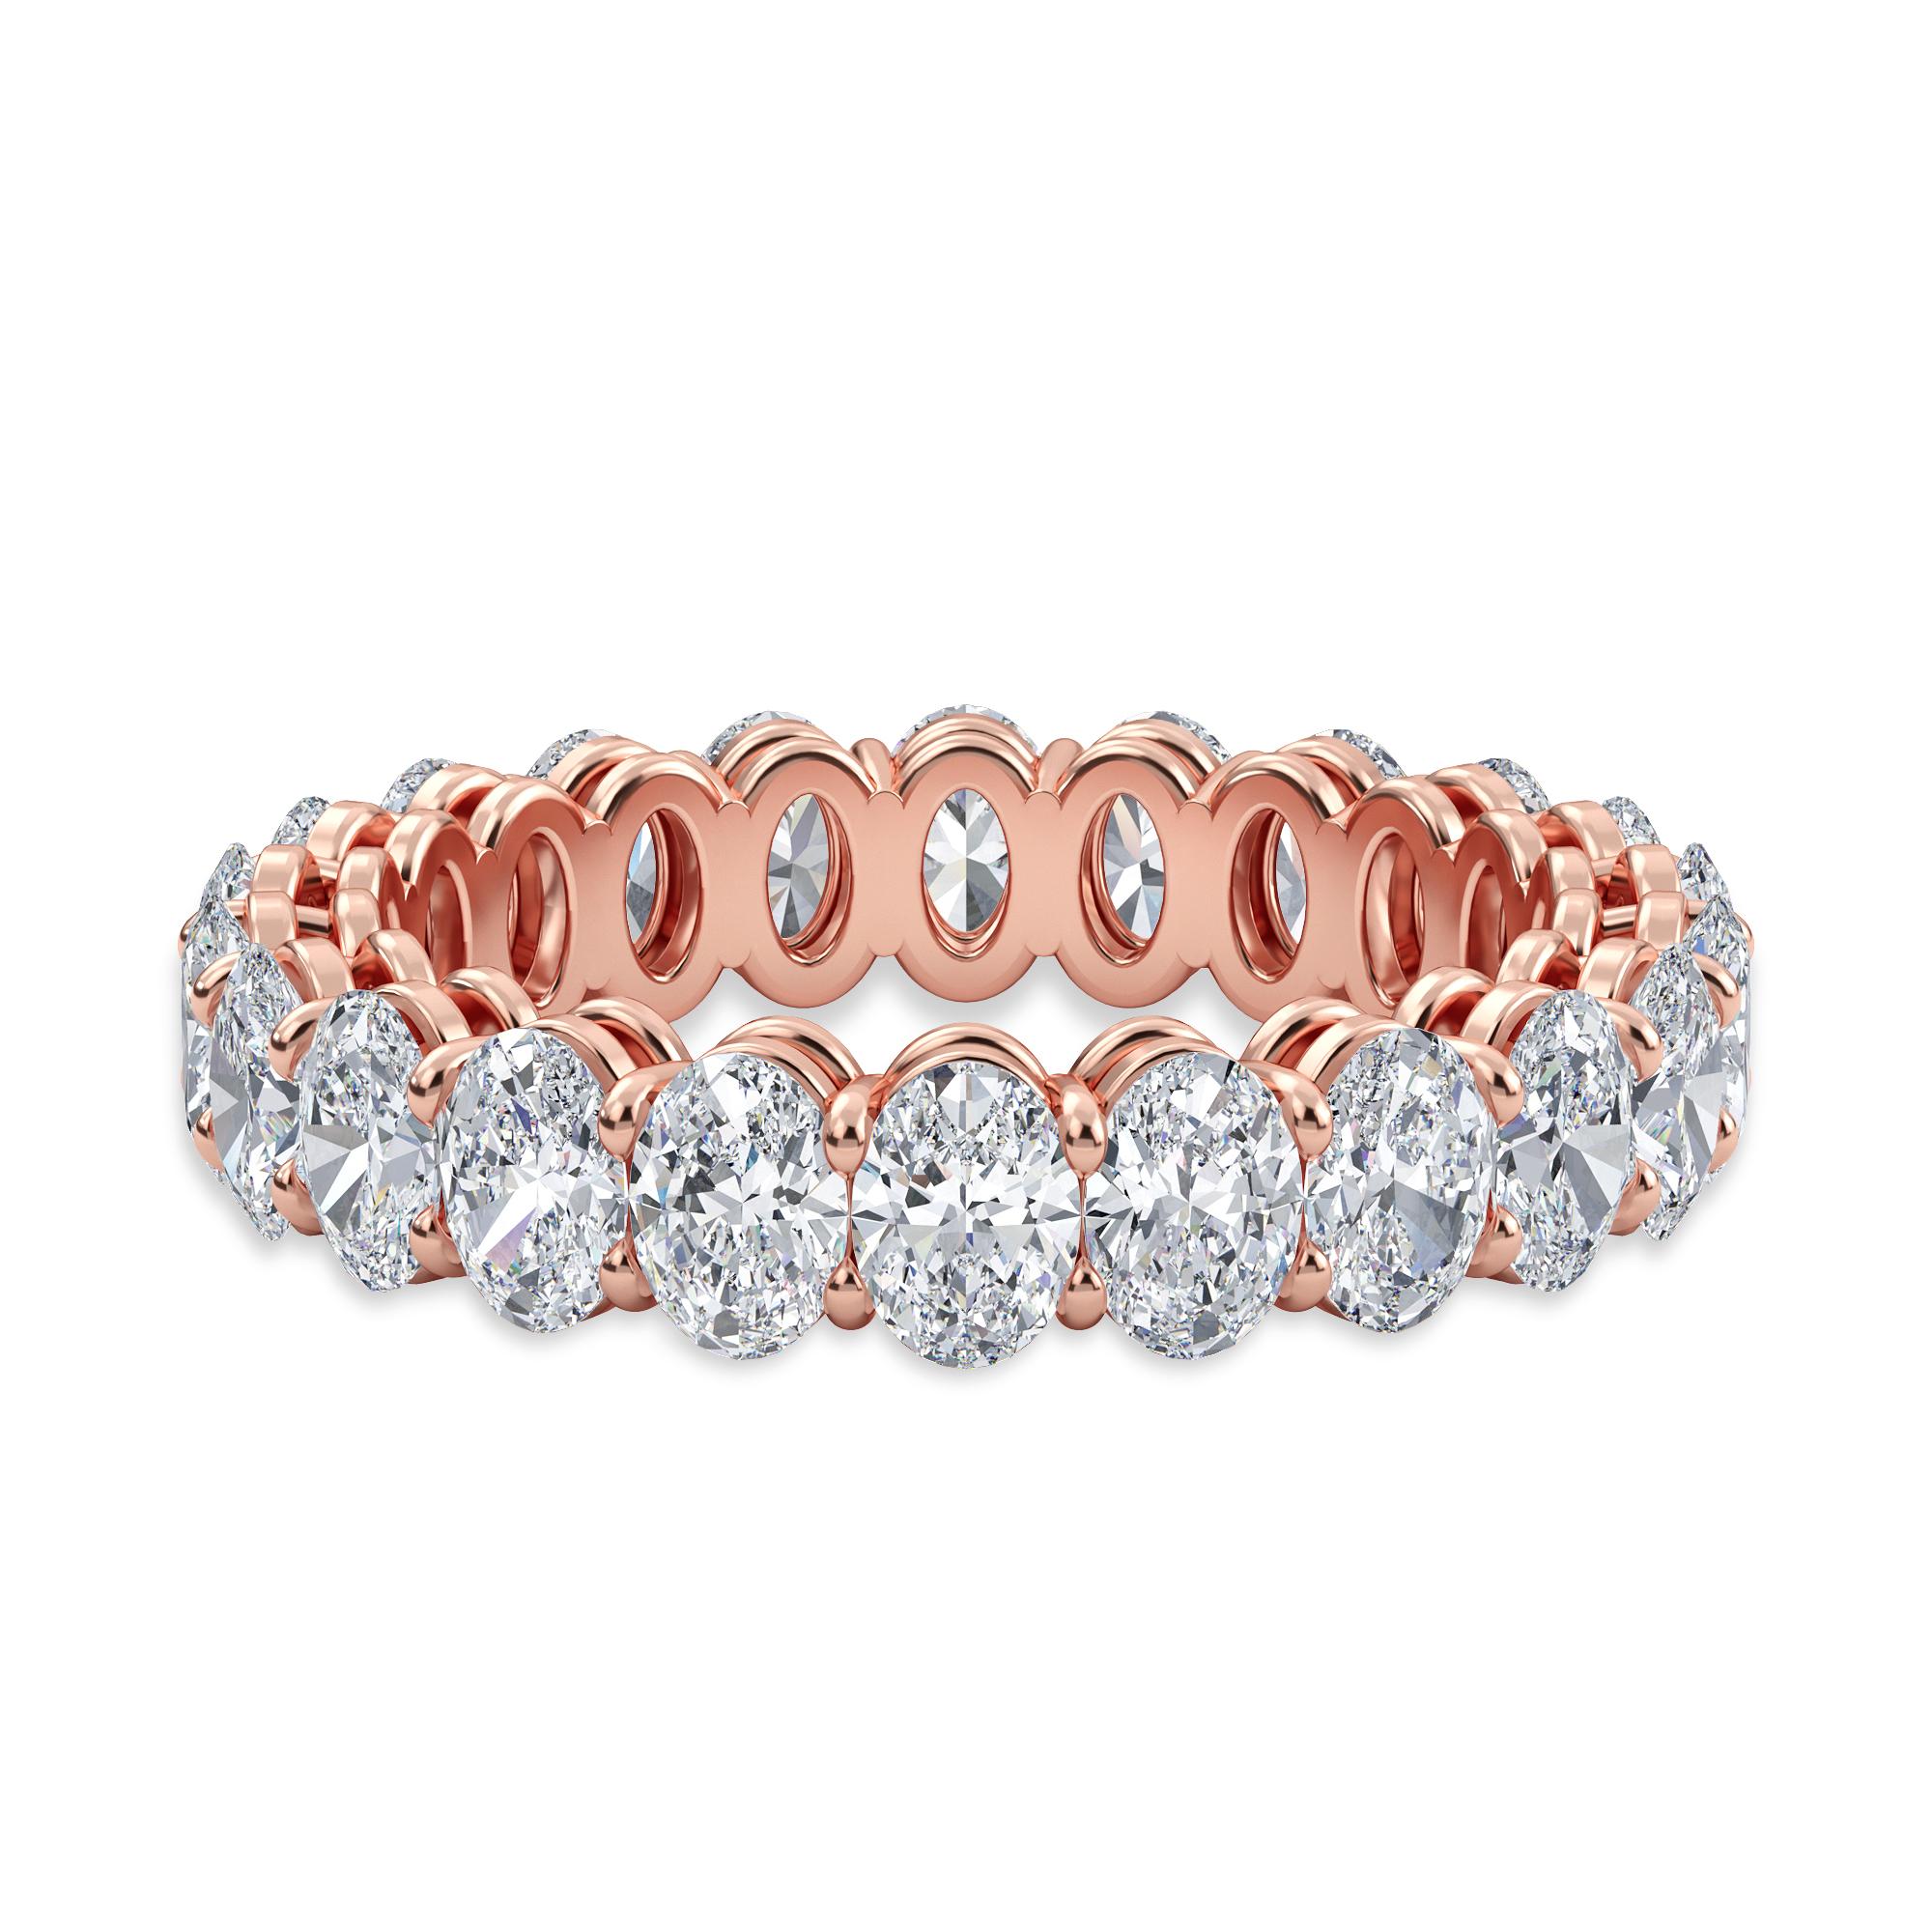 This Oval Diamond Eternity Band features 22 Oval Diamonds and weighs 3.50 Total Carat Weight. These diamonds are F Color, VS-SI Clarity, and are set in a 18K Rose Gold setting in a finger size 6.5. 